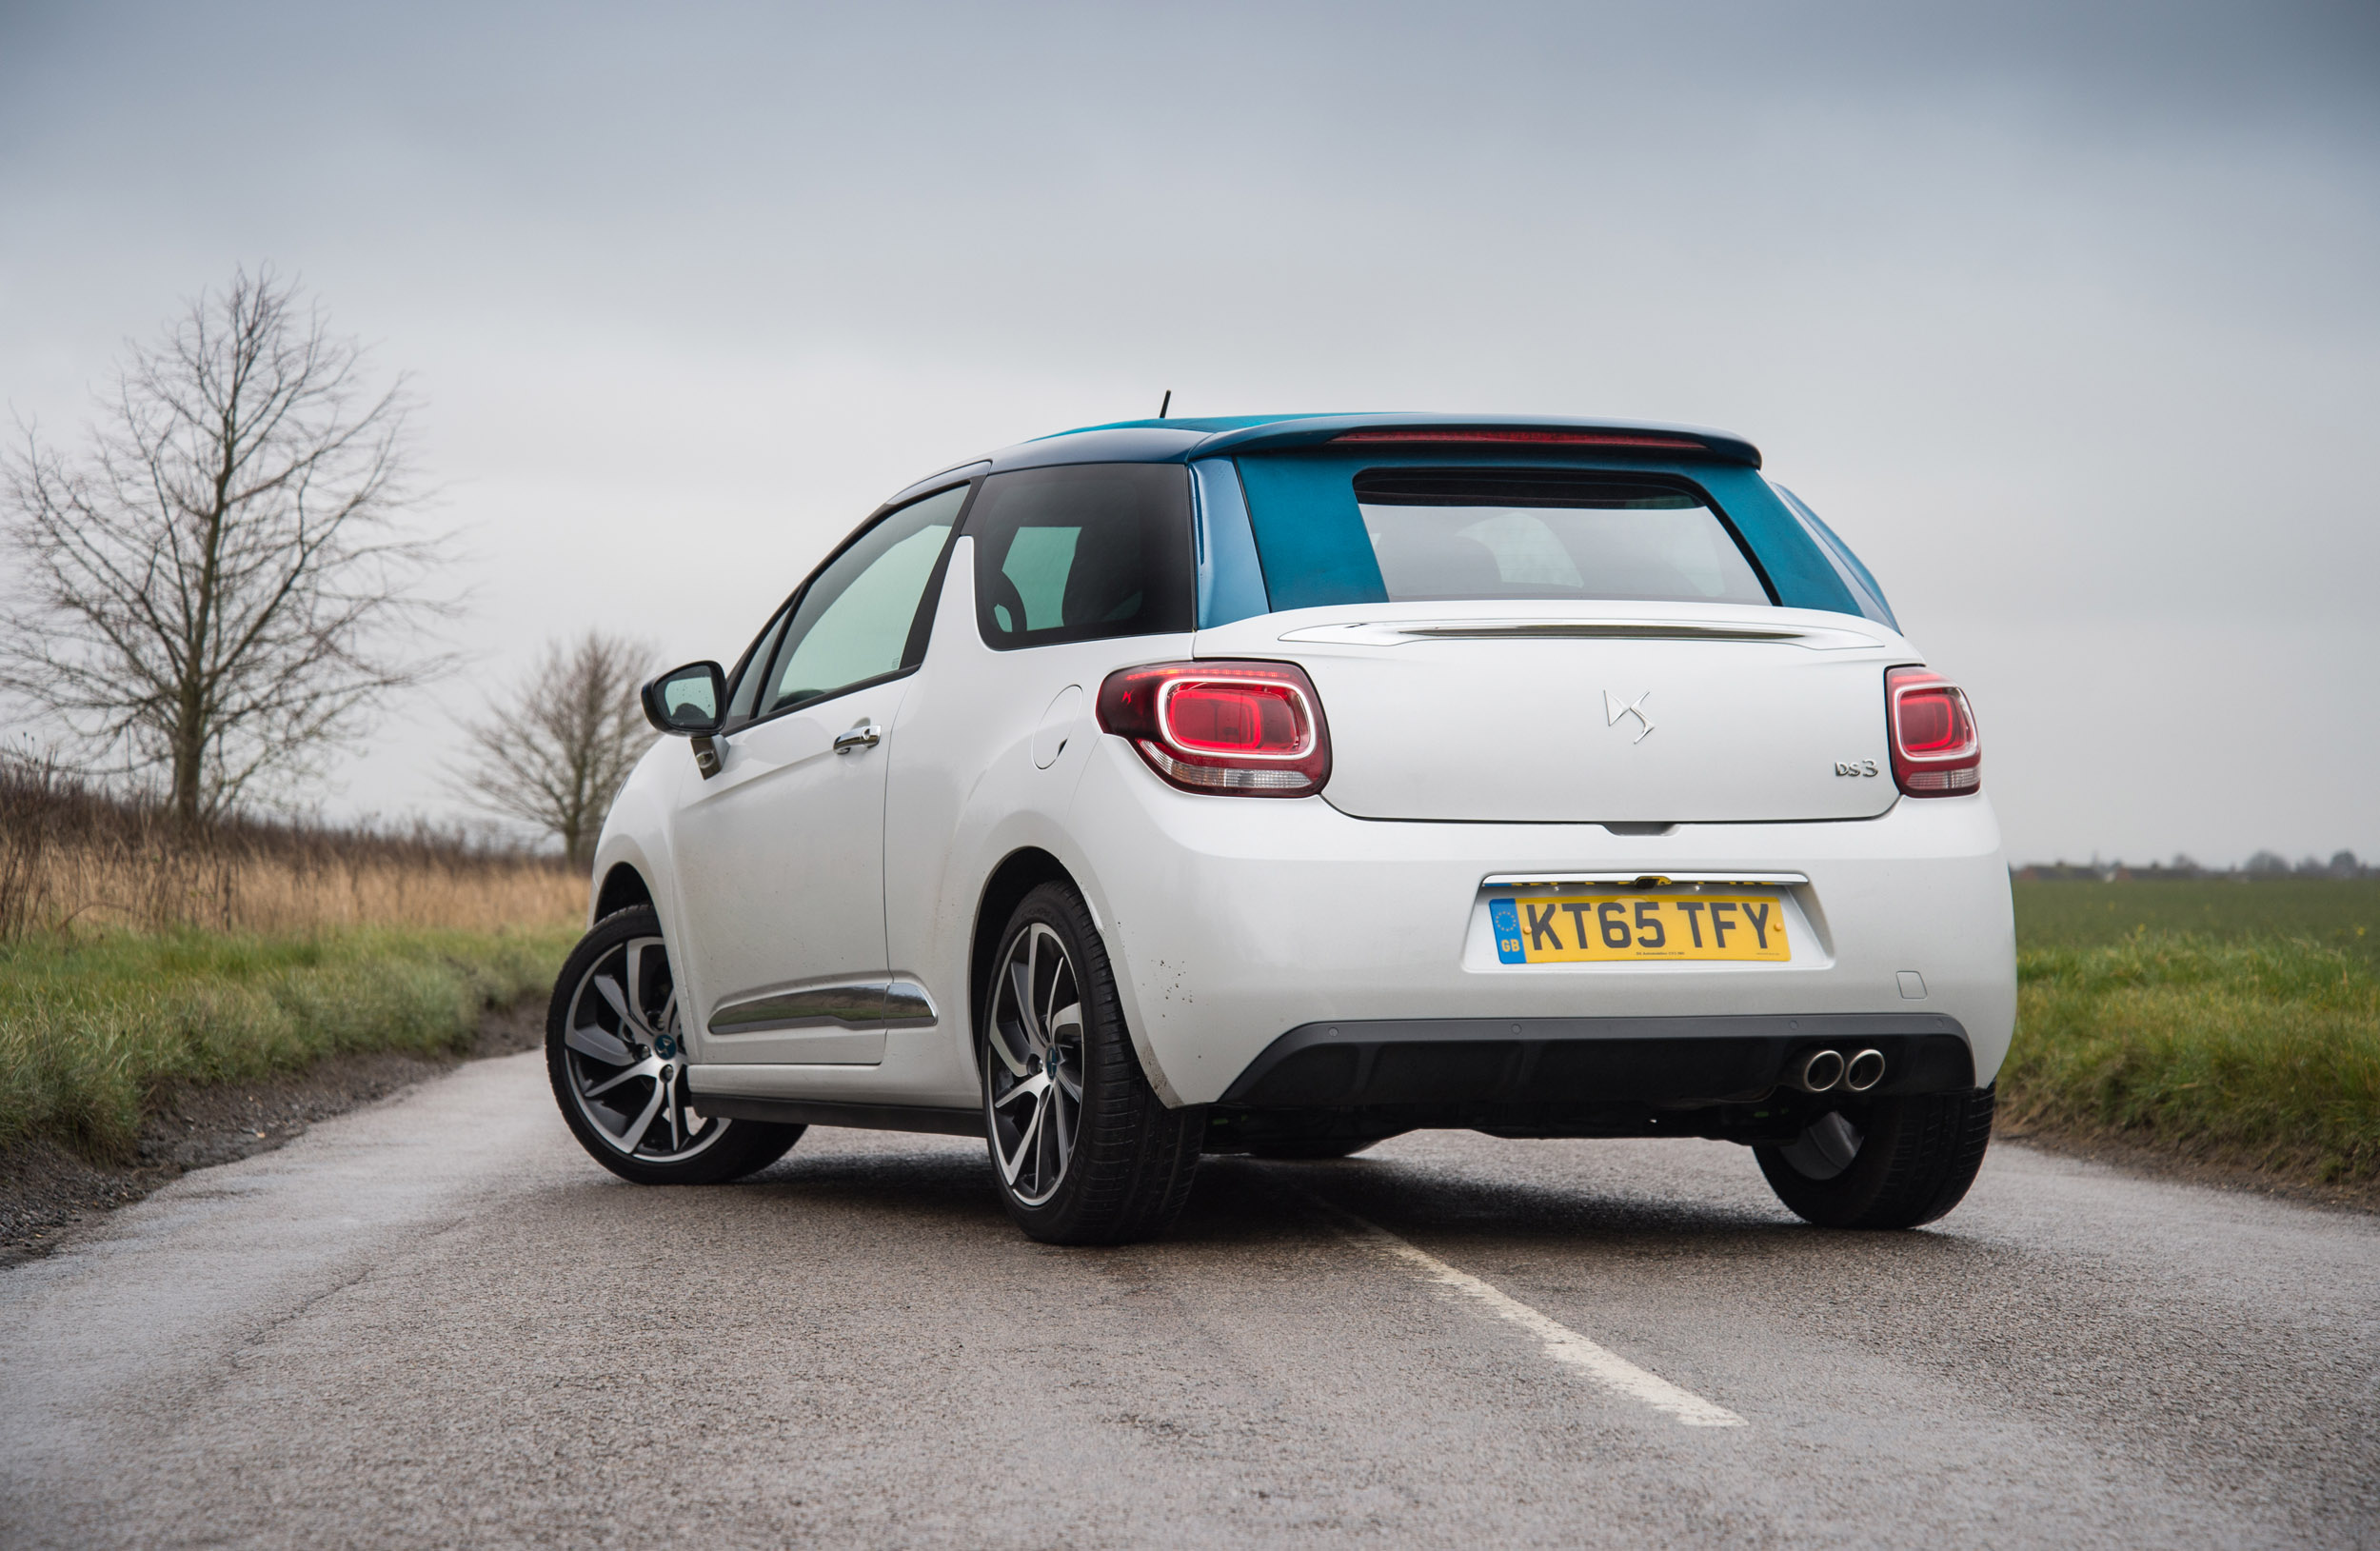 Citroen review - prices, specs and time | evo